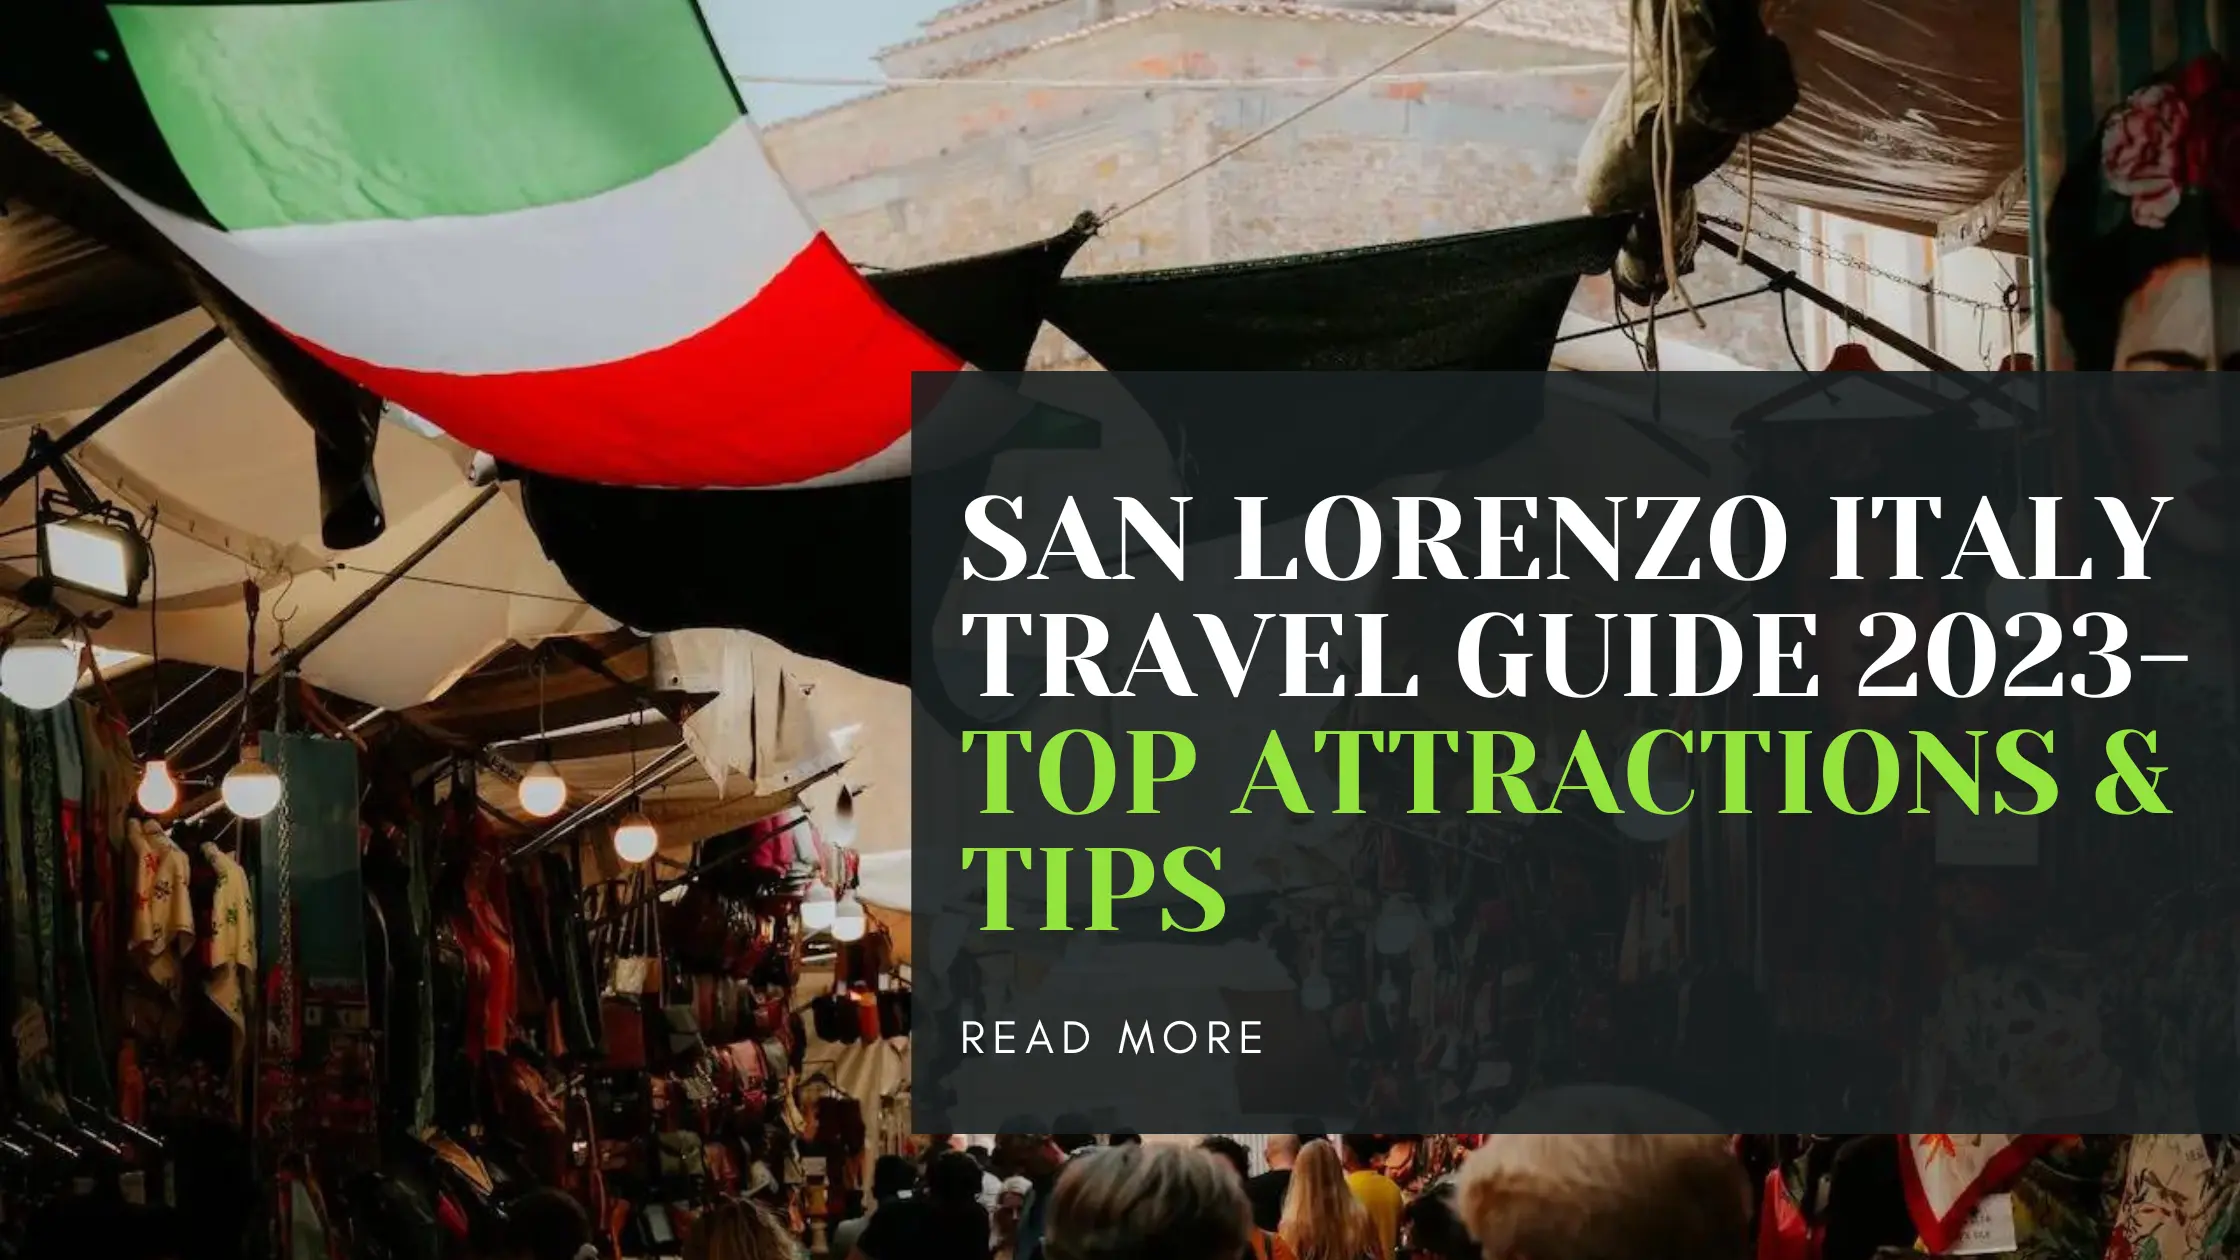 San Lorenzo Italy Travel Guide 2023- Top Attractions & Tips